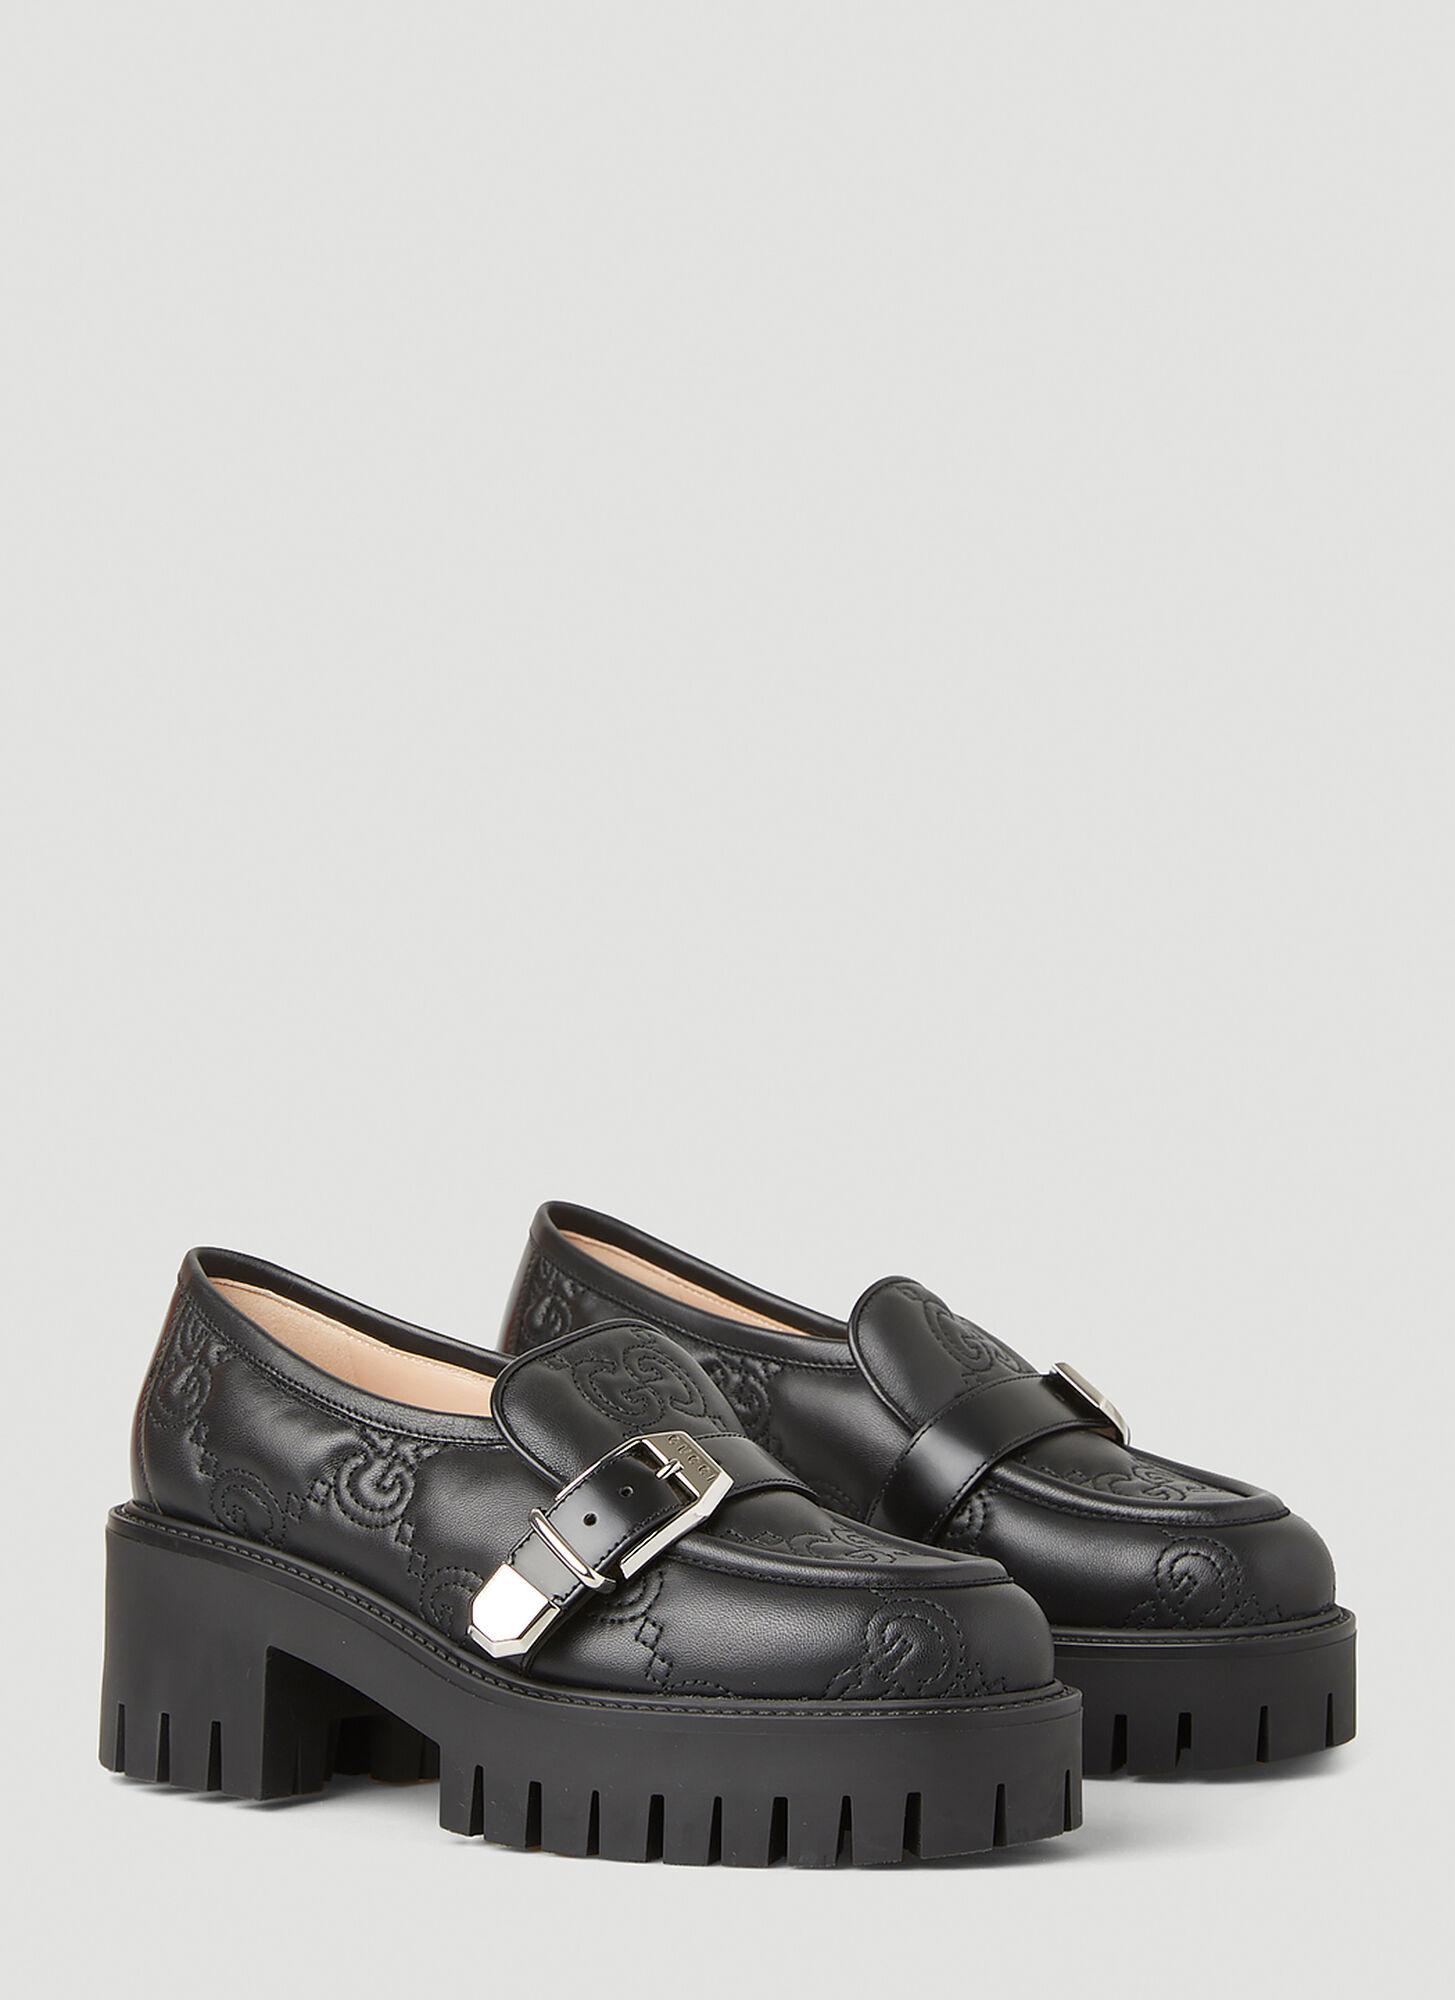 Gucci GG Matelassé Loafers in Gray | Lyst